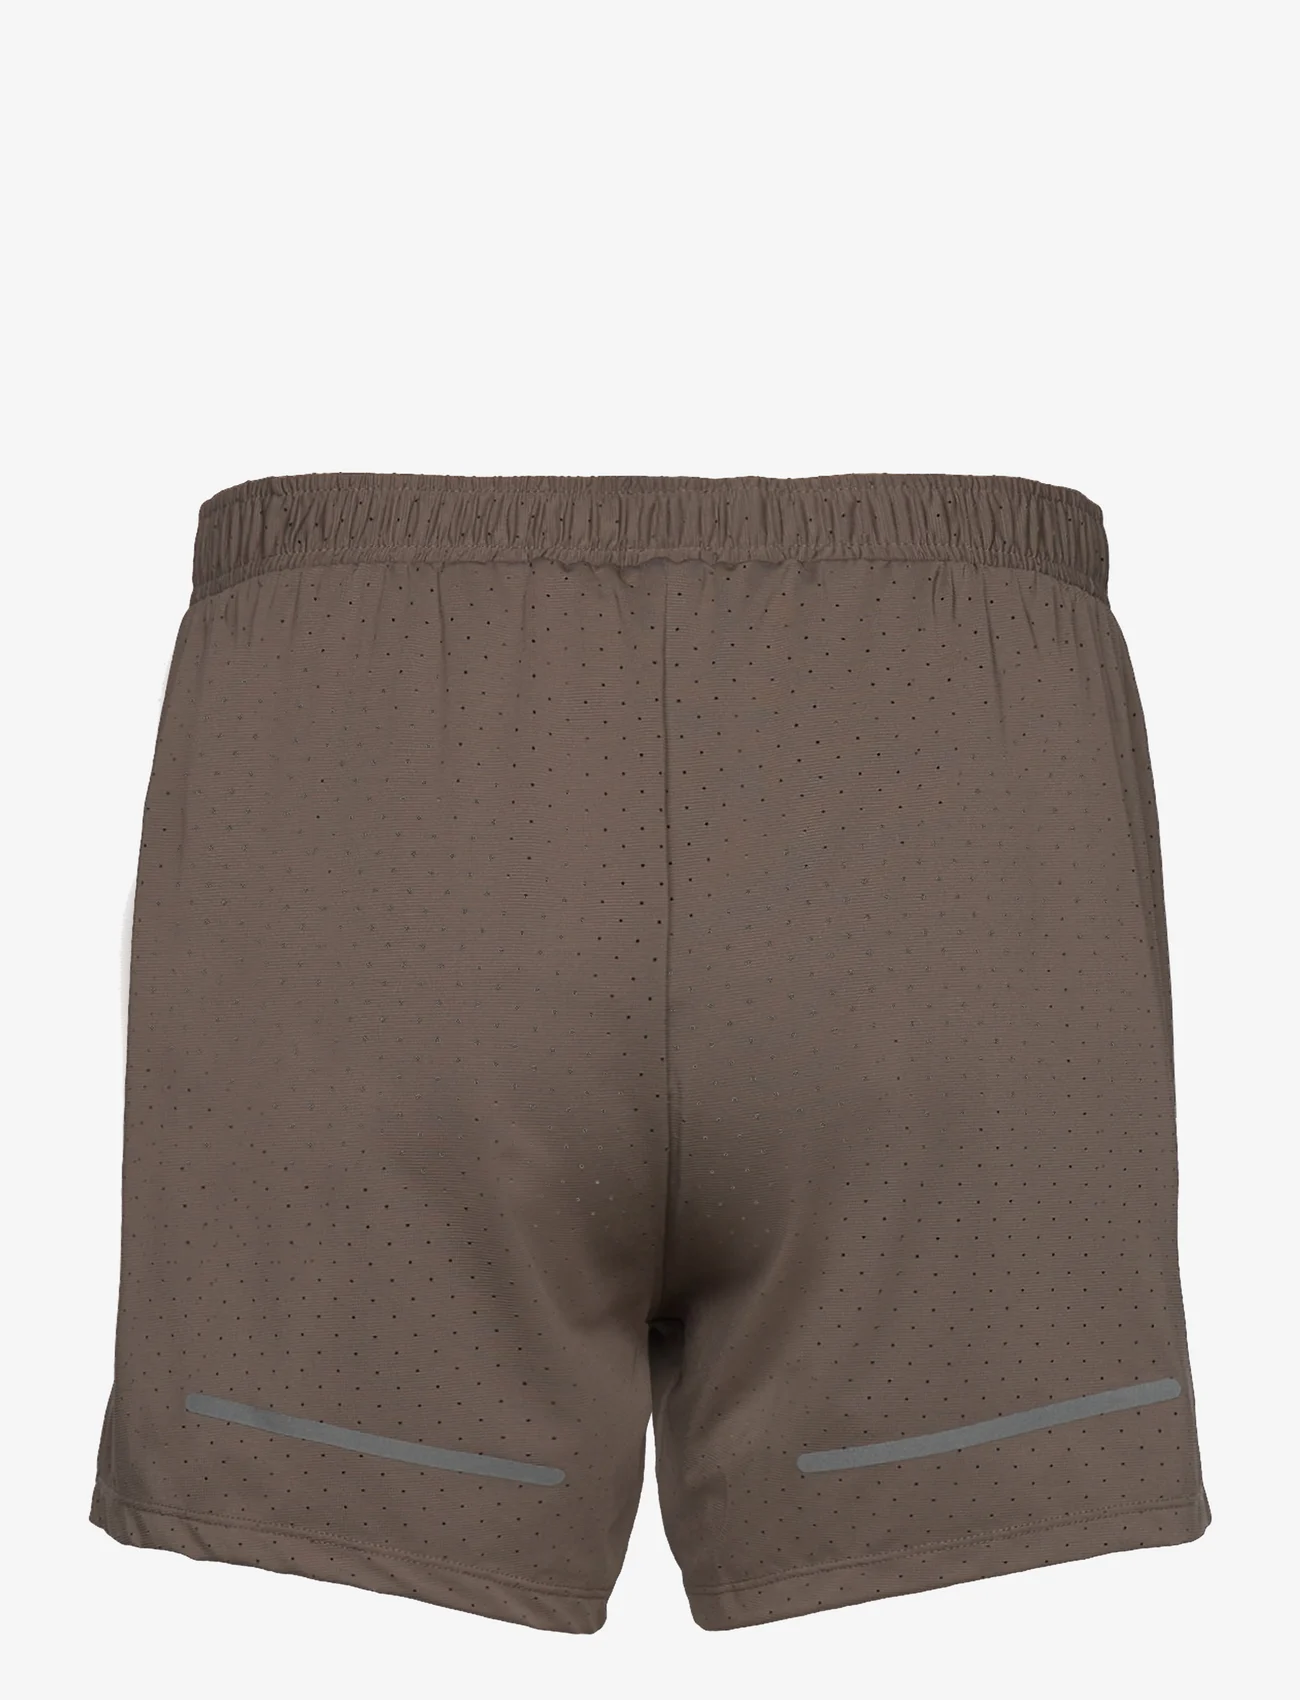 Björn Borg - BORG RUNNING PERFORATED 5' SHORTS - laveste priser - bungee cord - 1